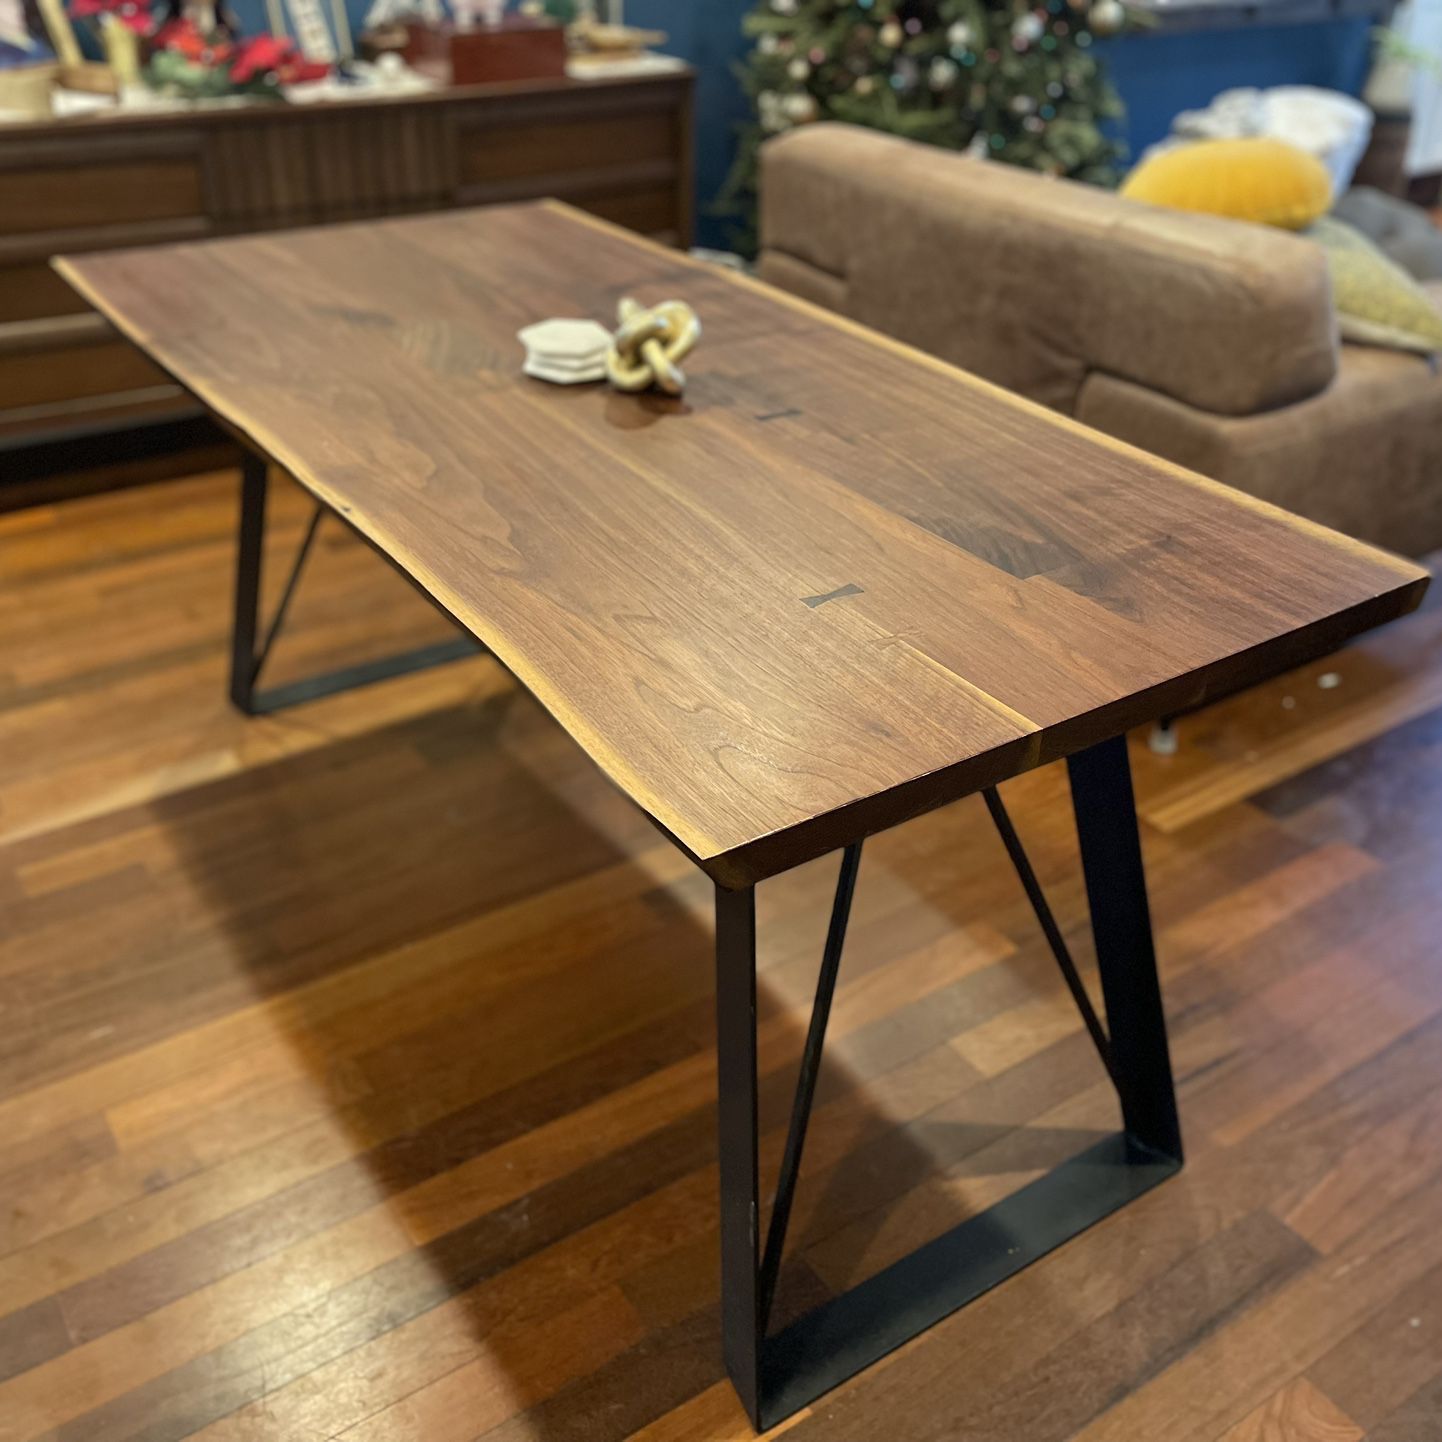 Beautiful Solid Walnut Slab Table/ Or Desk . Custom Quilted Inlayed Top. Removable Legs For Easy Moving